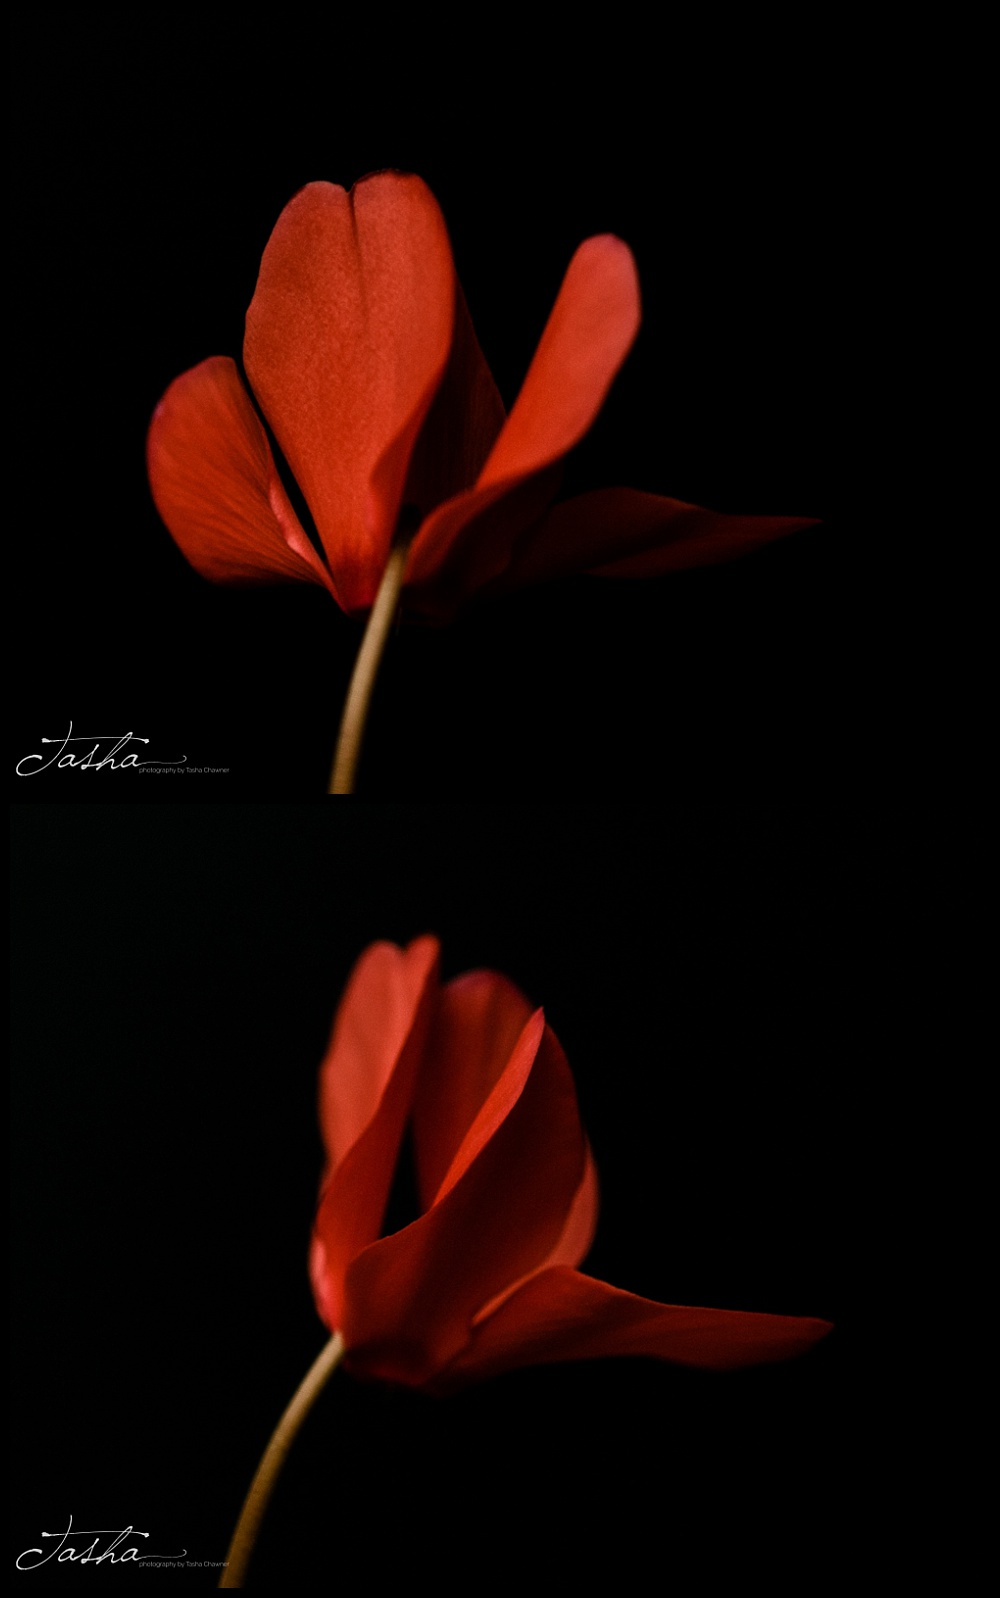 different aspects of a red cyclamen flower